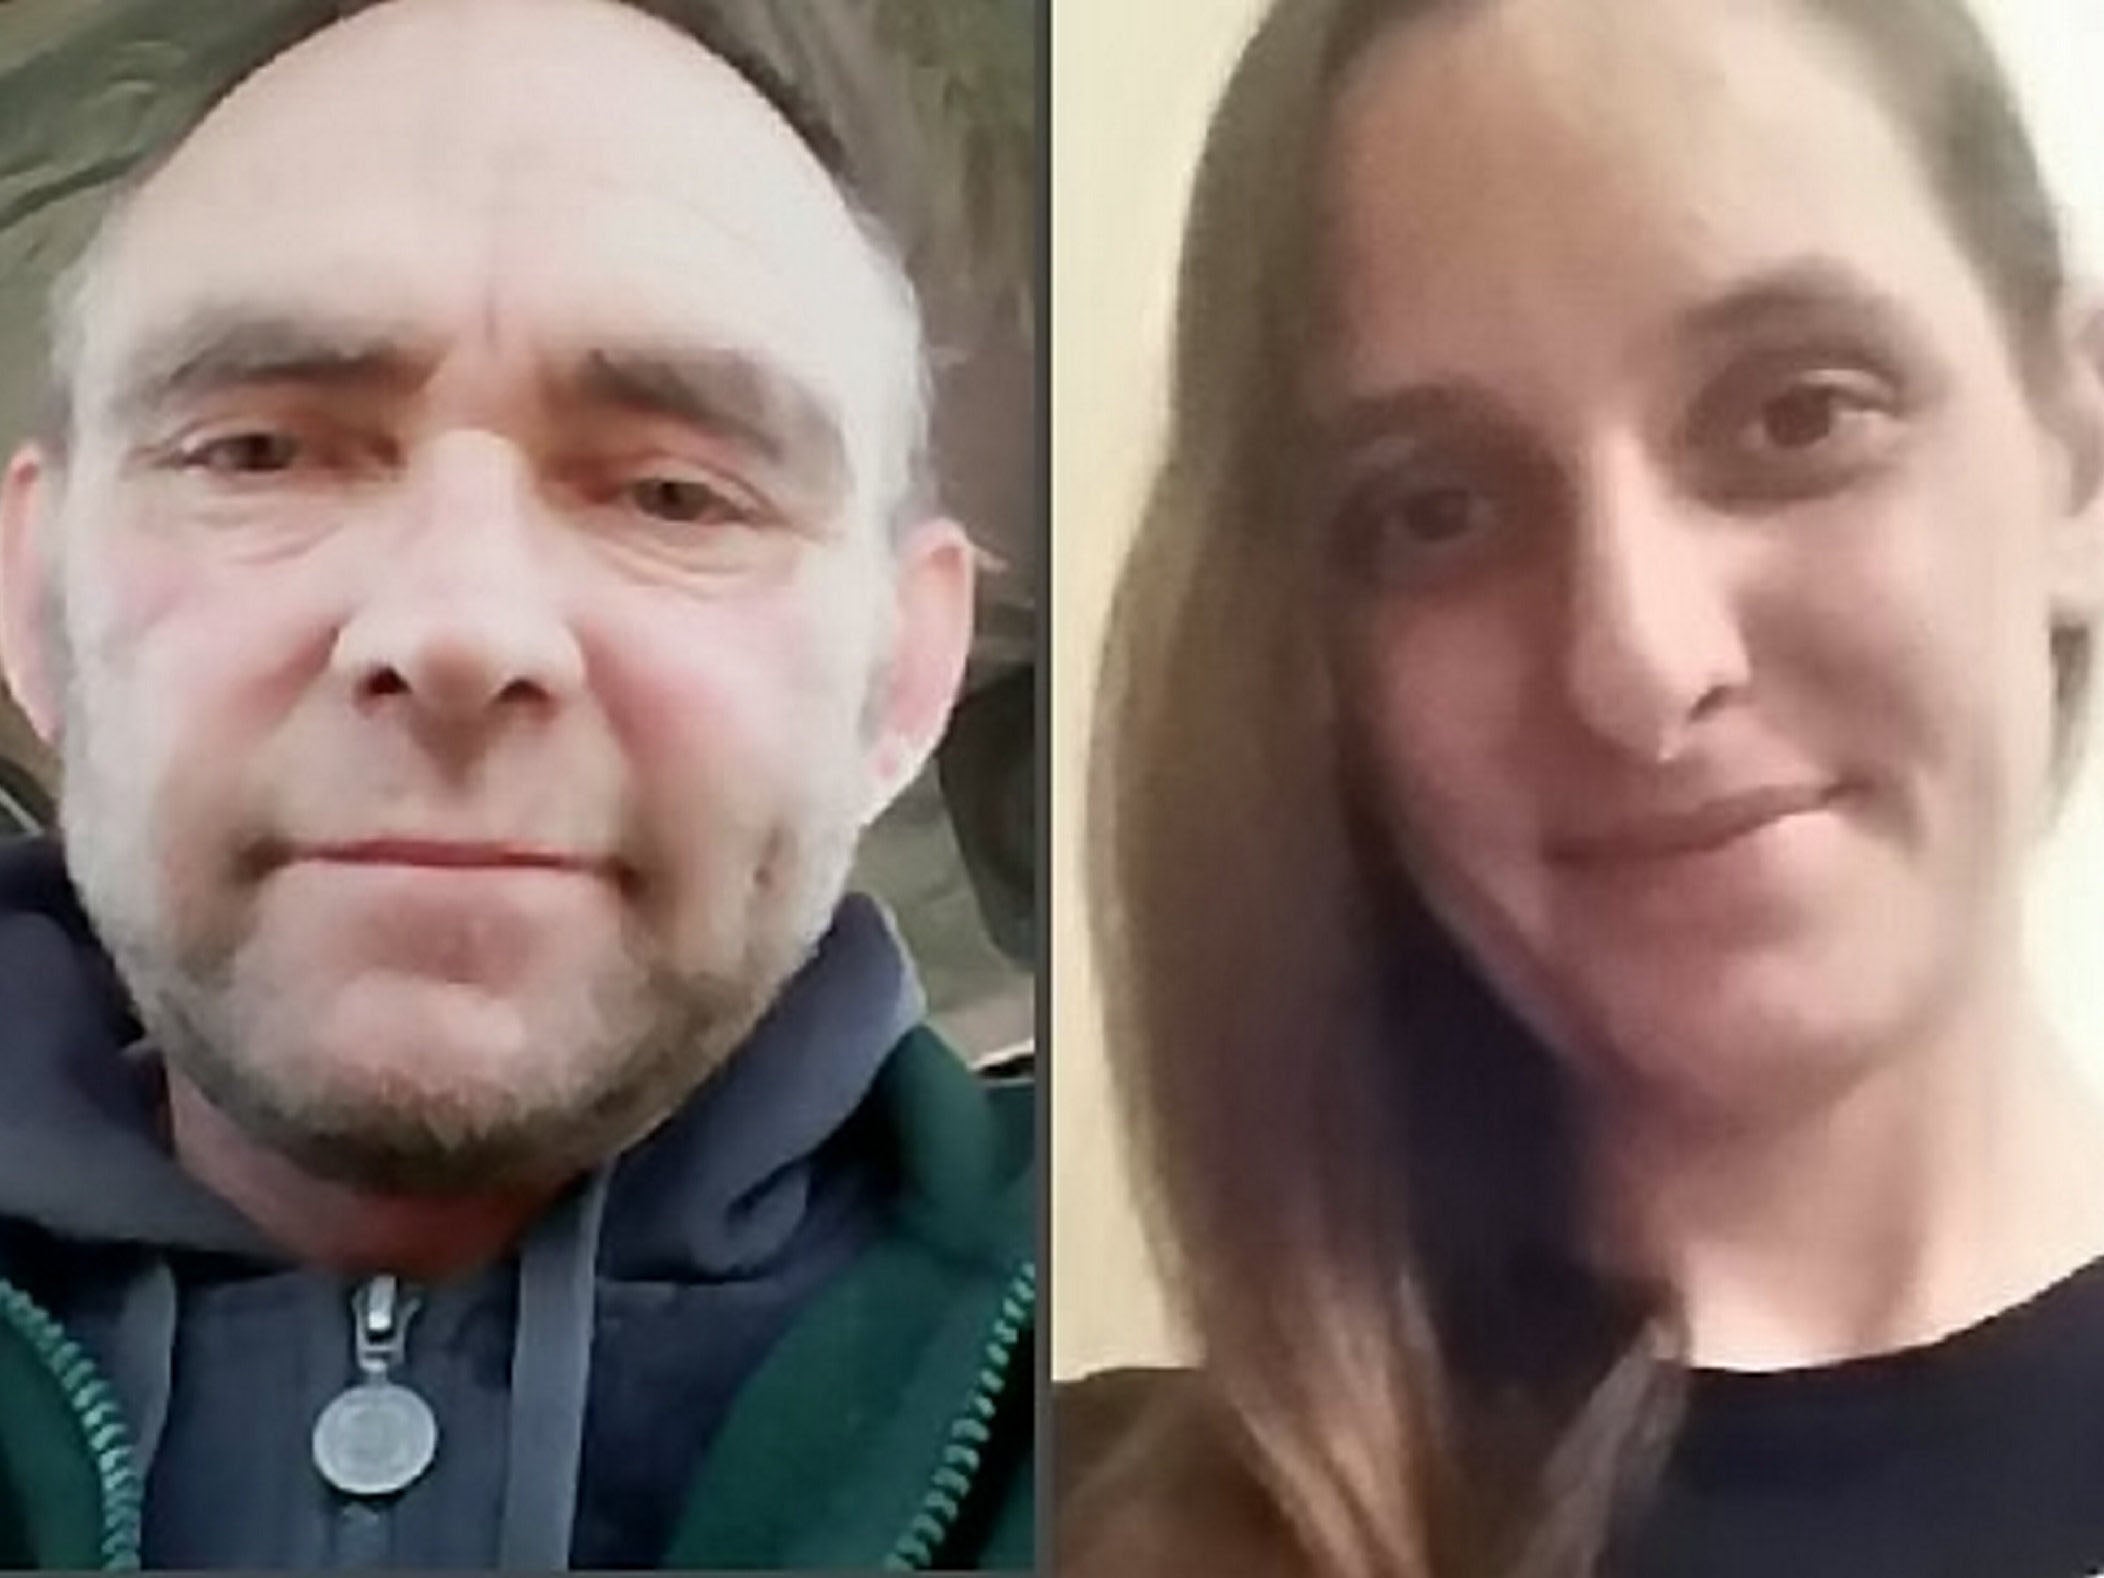 Glenn Pollard and Hayley Weatherall, who conspired to murder the latter’s husband